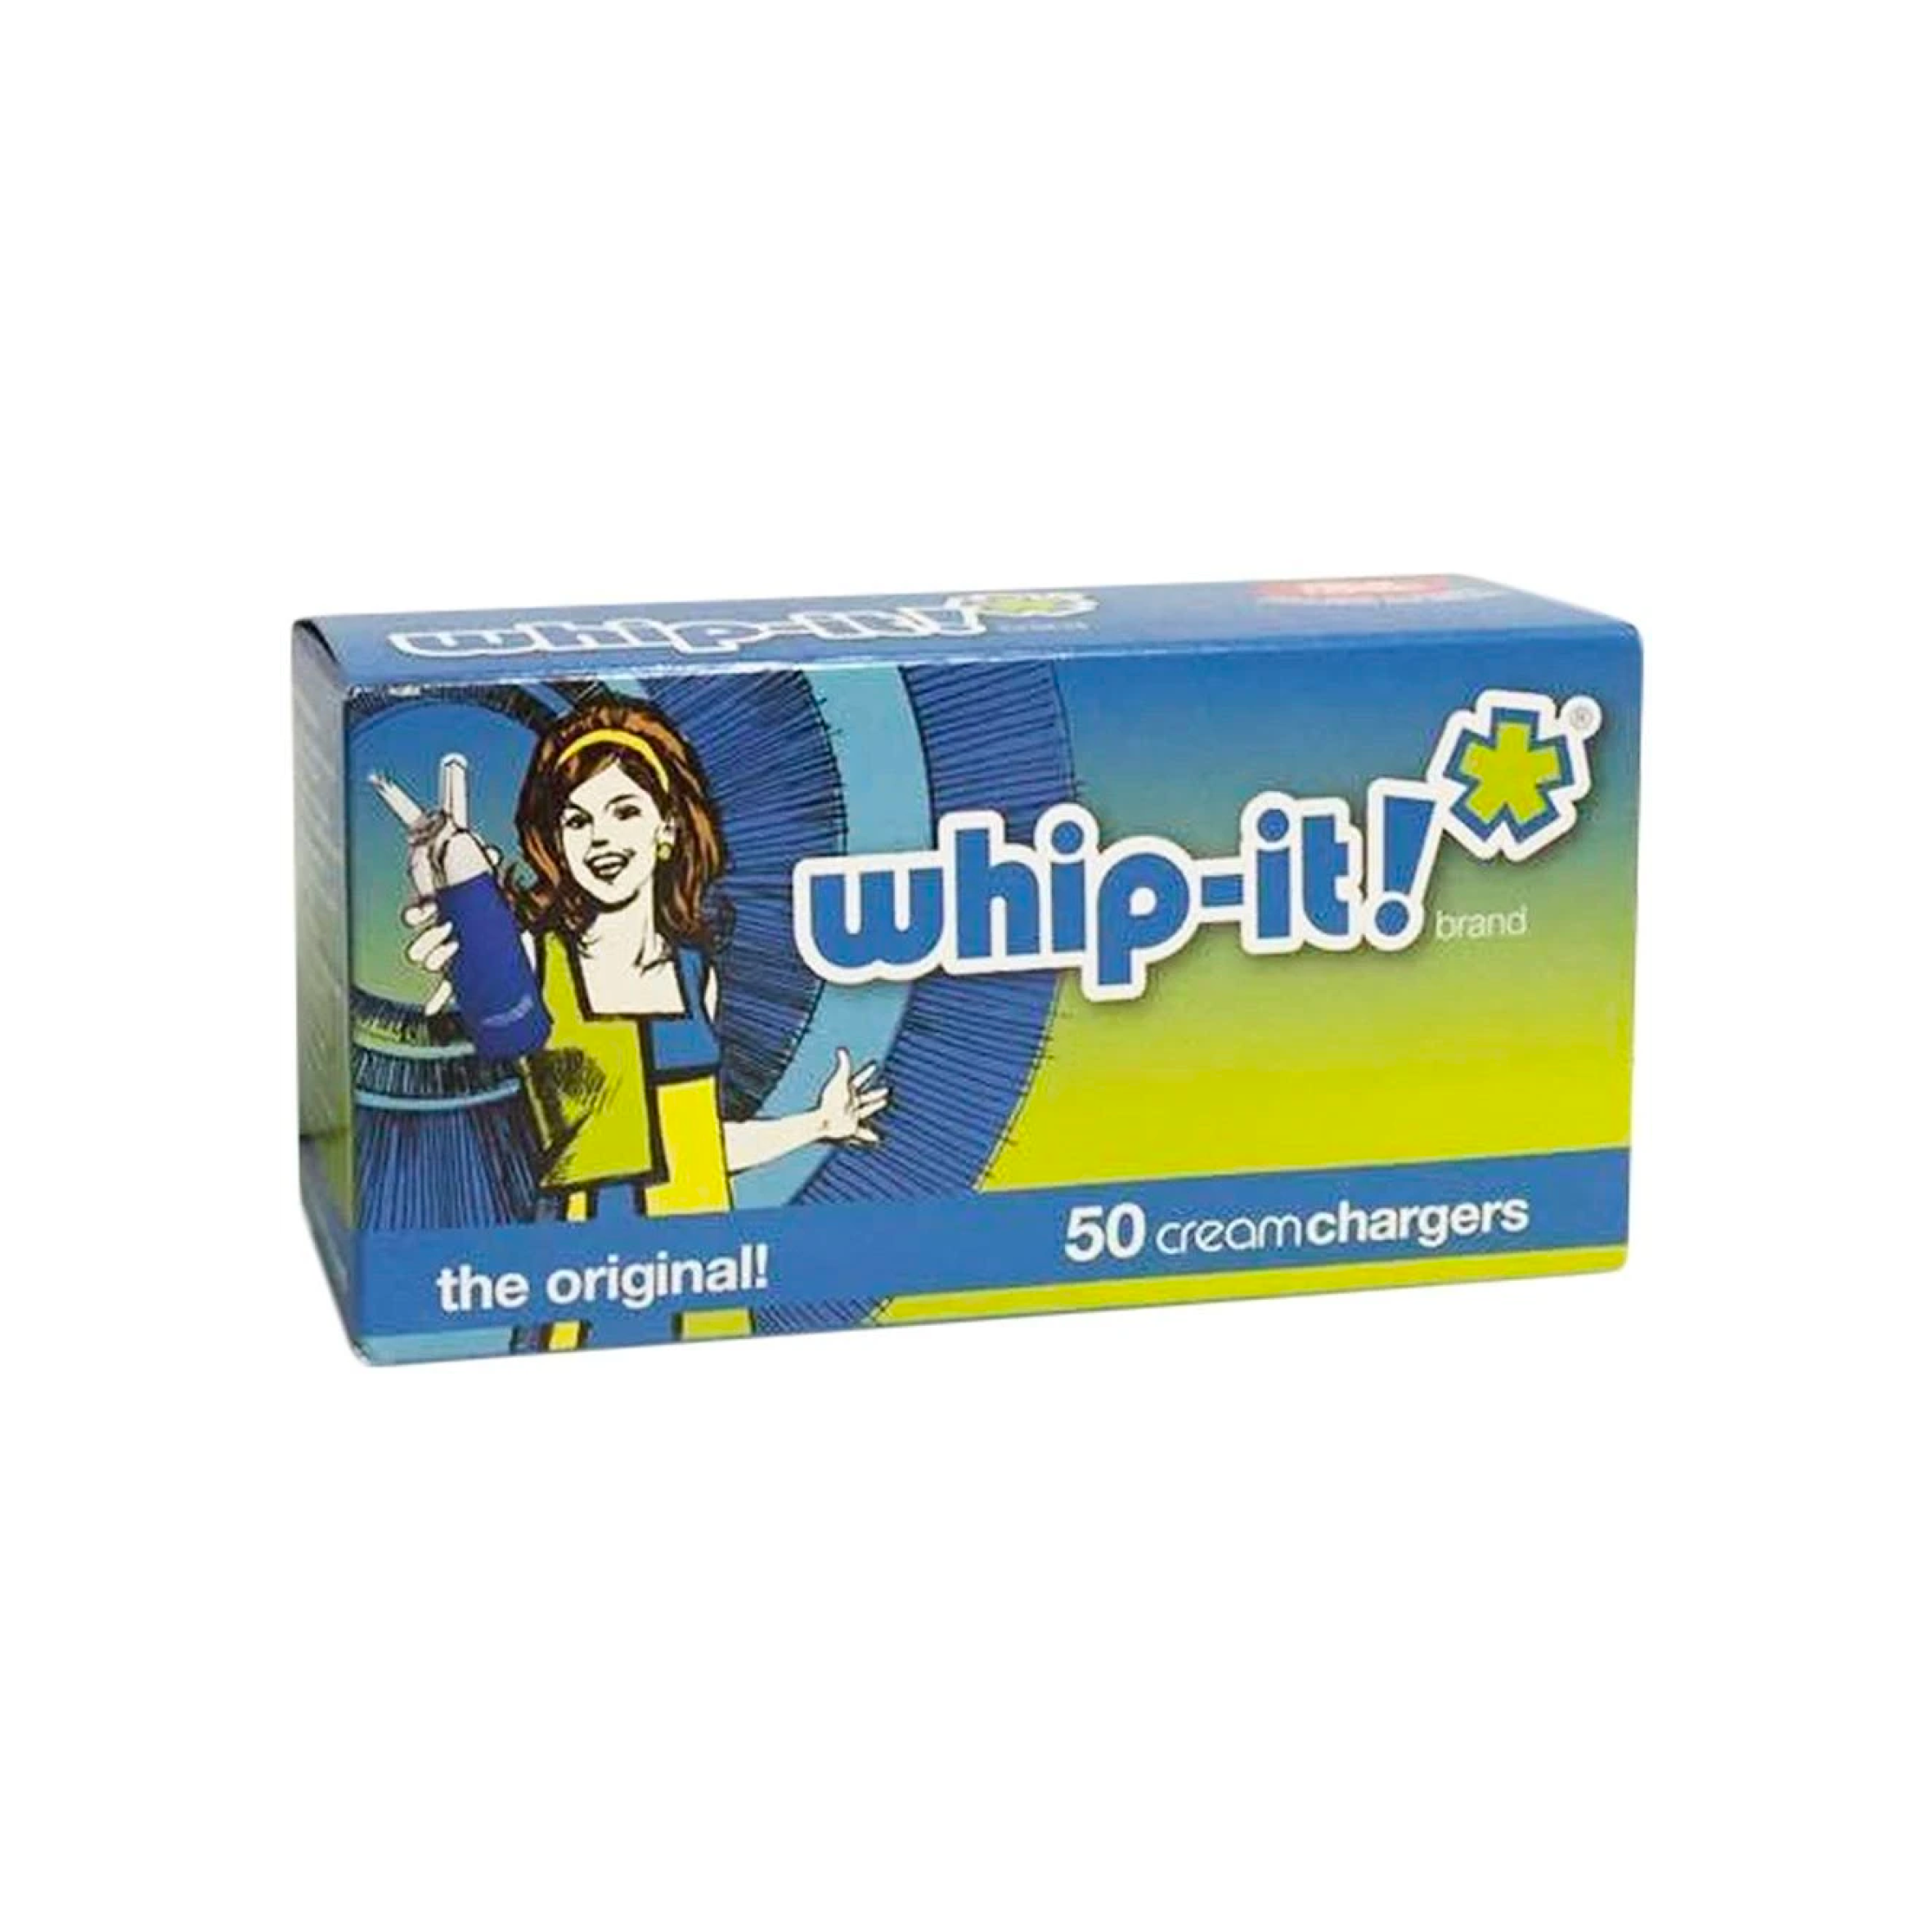 600 Whip-it! Cream Chargers - 12 x 50 packs (1 Carton)